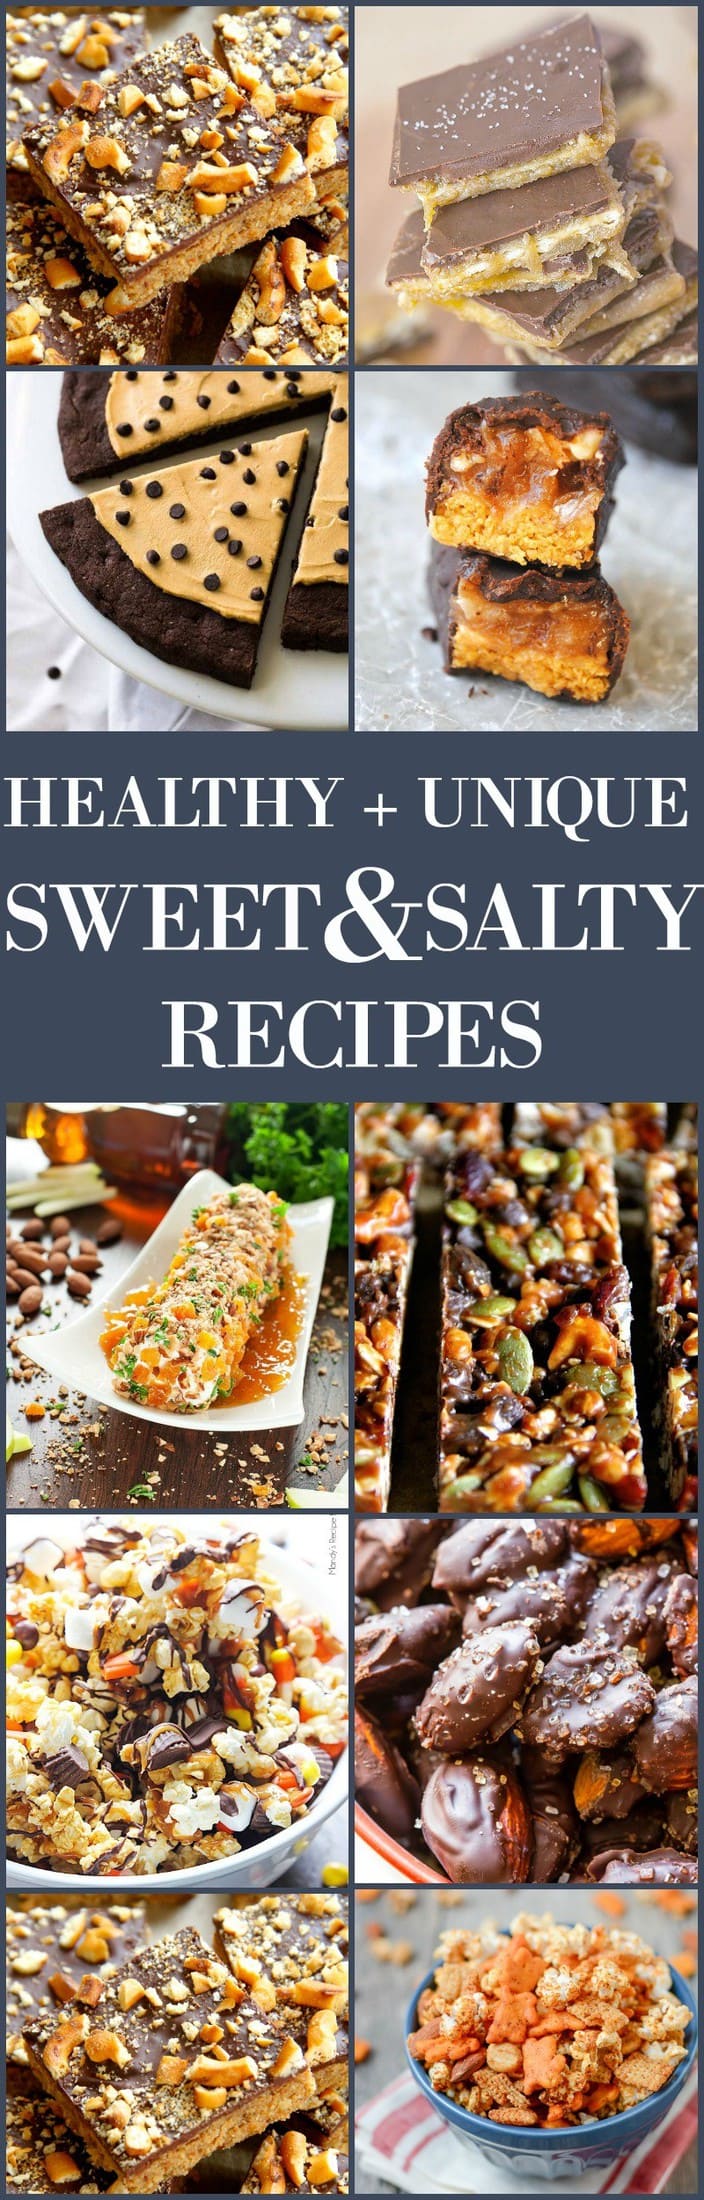 Healthy and Unique Sweet and Salty recipes- Quick, easy and delicious, you'd never believe they were all healthy! 